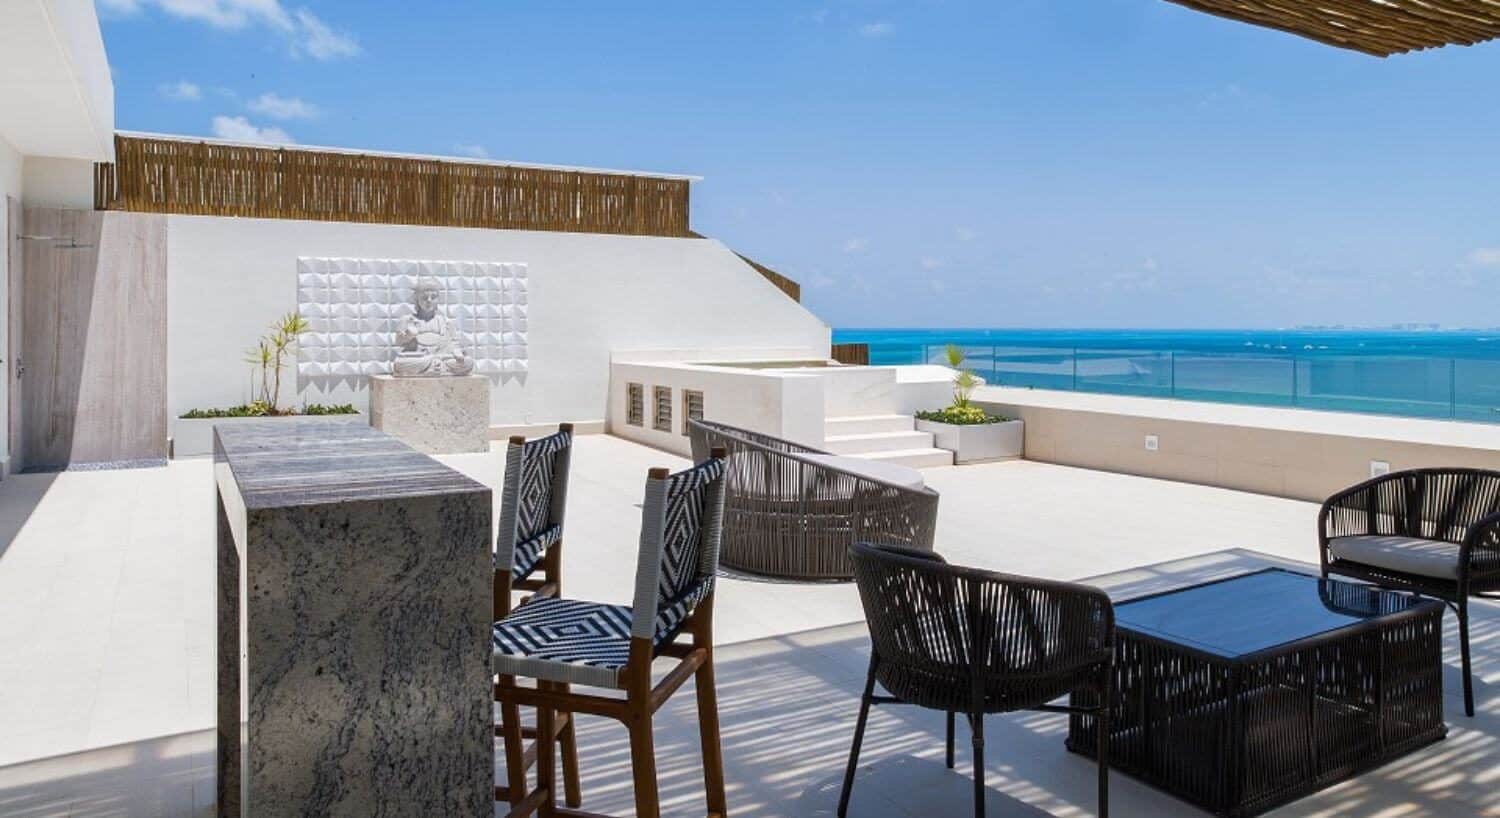 A rooftop terrace with a jacuzzi, bar with barstools, and patio furniture, with beautiful turquoise ocean views.